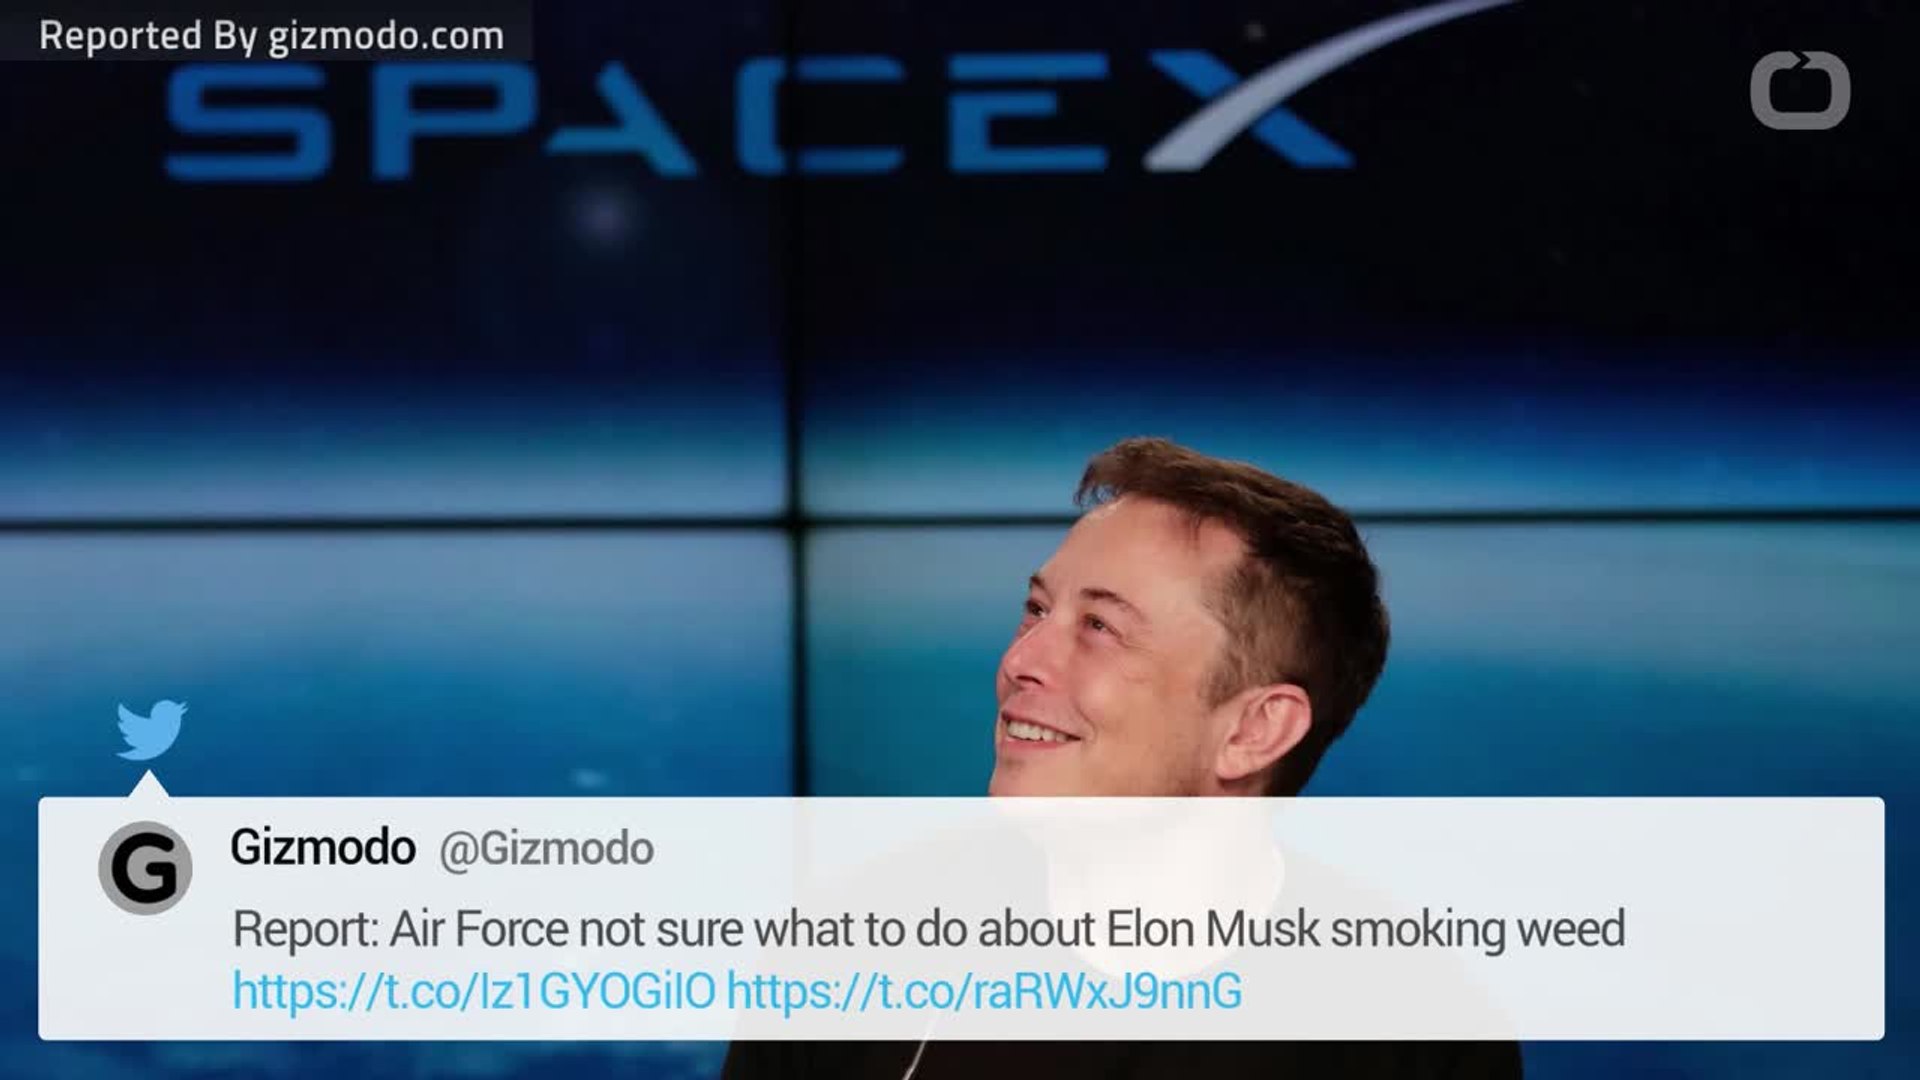 Elon Musk Smoking Weed Causes Controversey